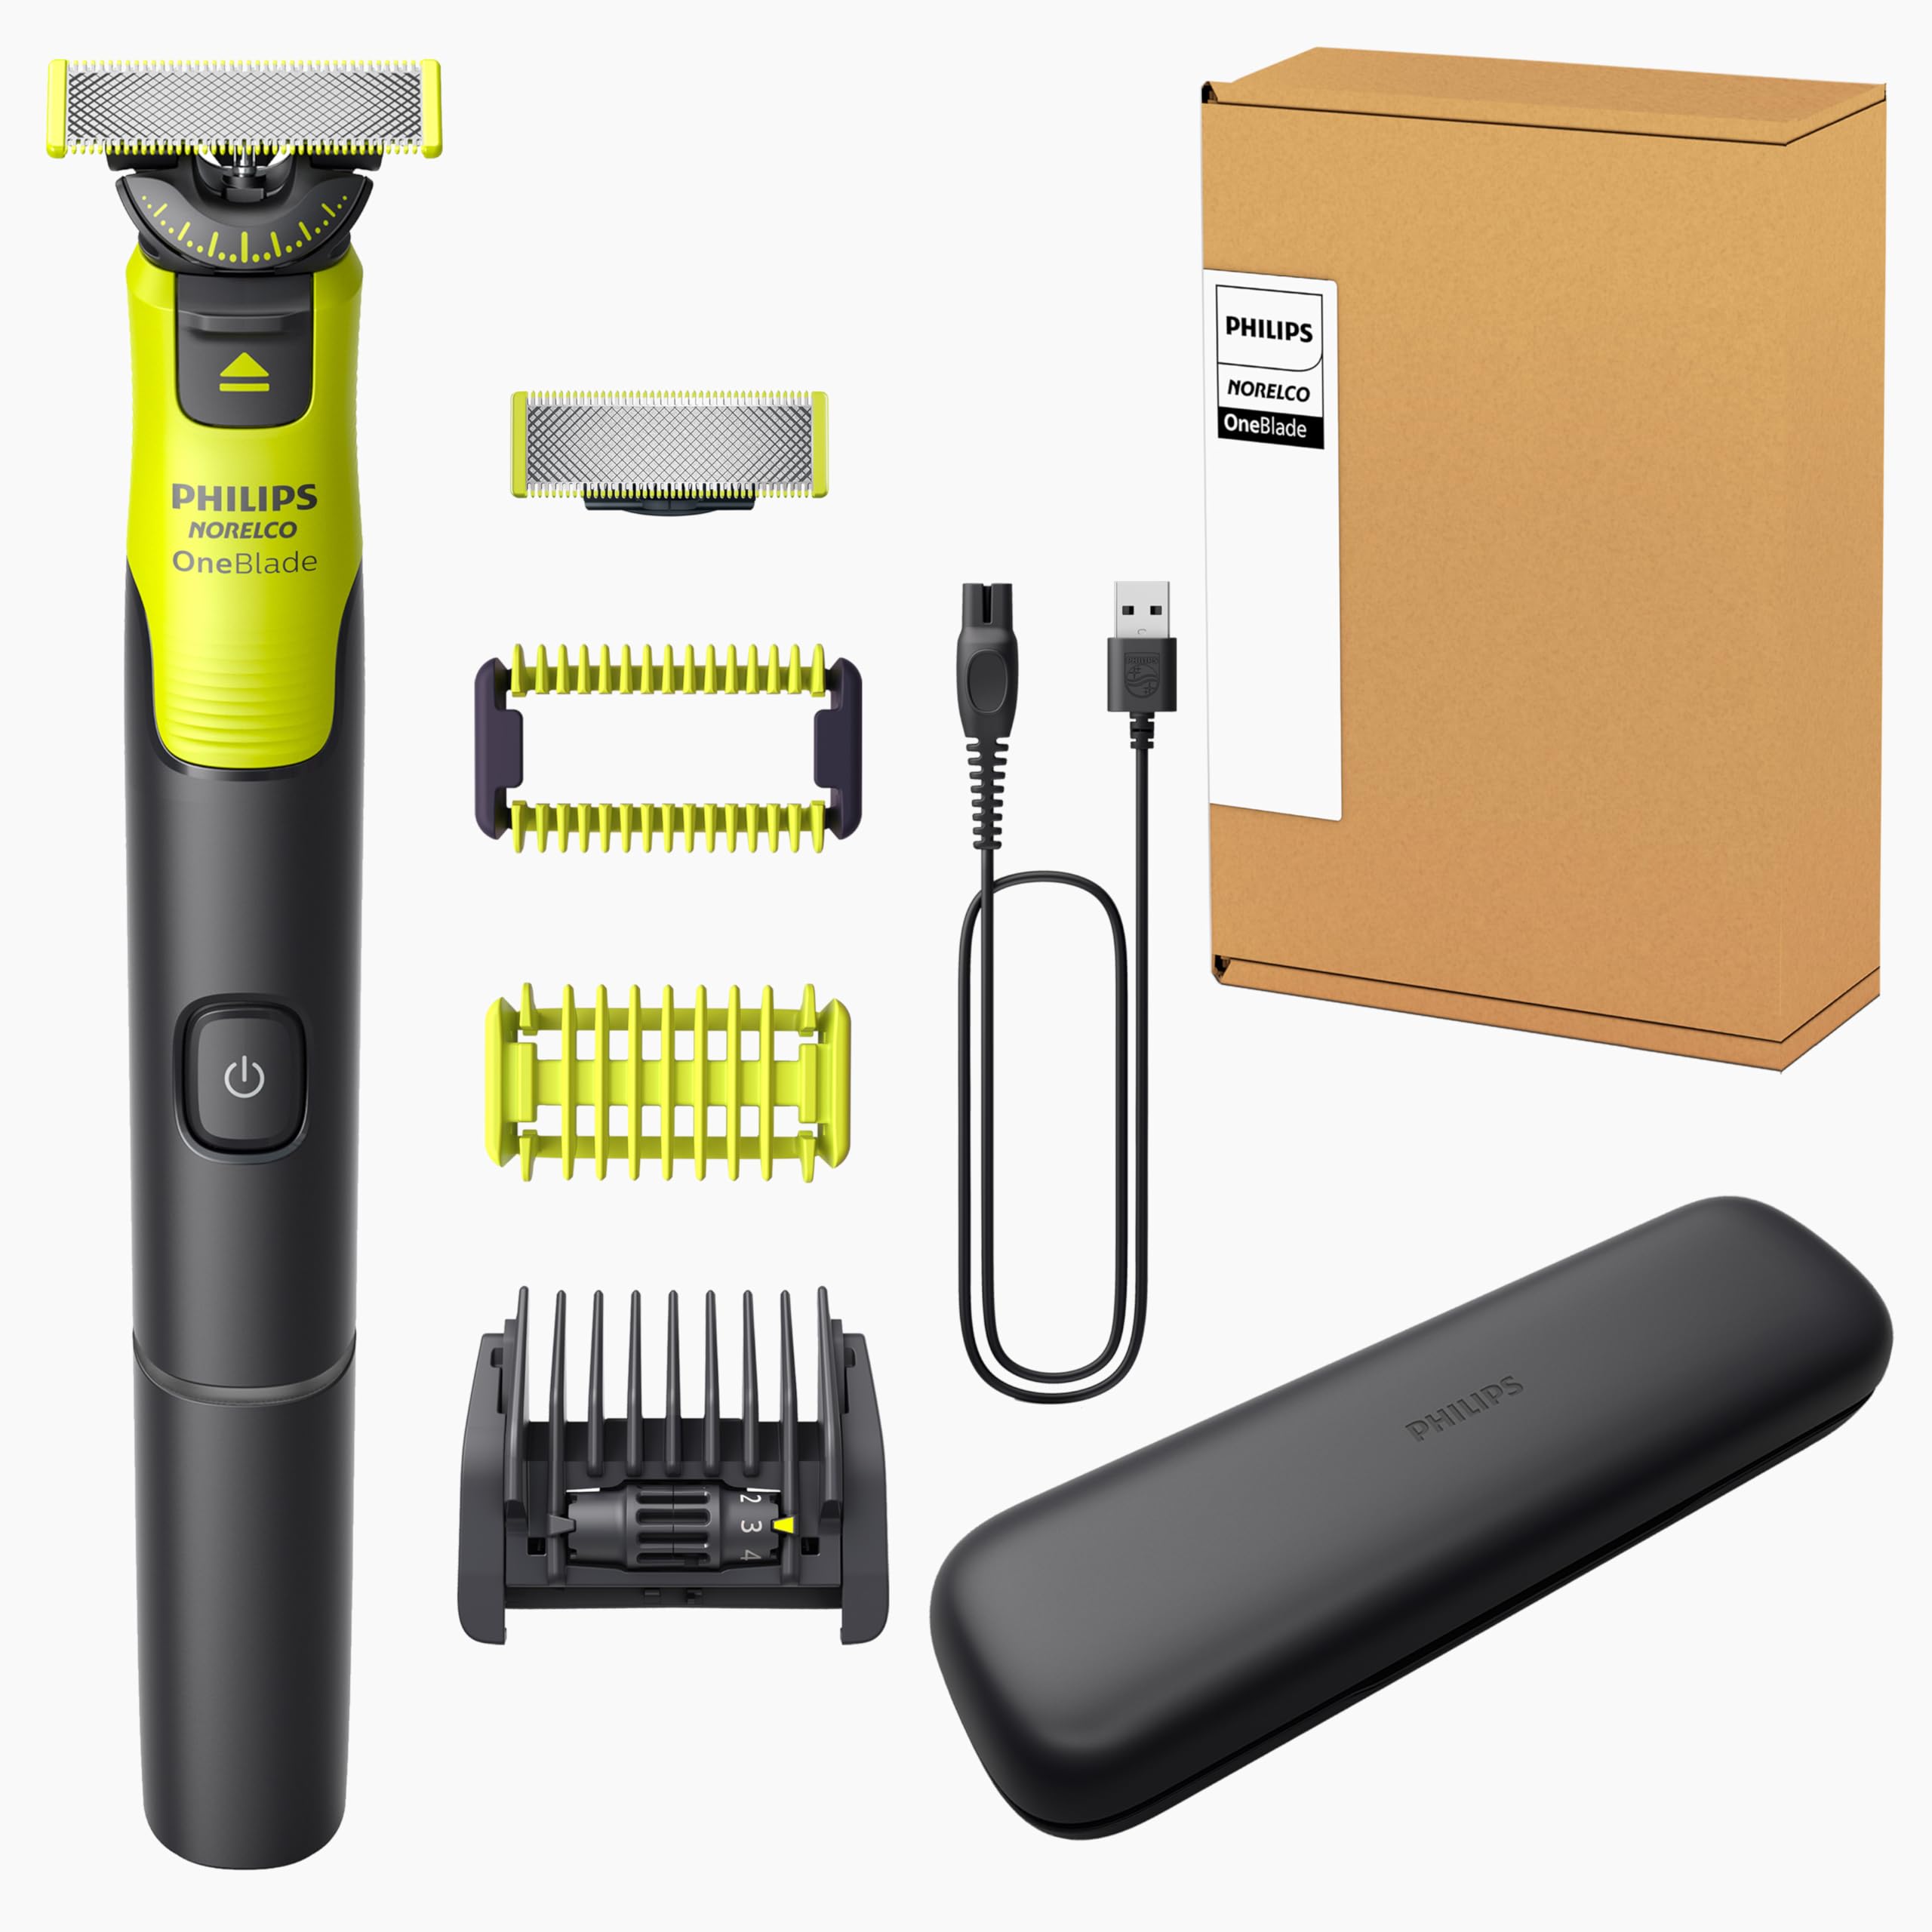 Philips OneBlade 360 Face + Body with Connectivity, Electric Shaver/Razor, Beard Trimmer, and Body Groomer, with 360 Blade, 5 Length Adjustable Comb, Bodygroom Kit, and 1hr Fast Charge, QP4631/90